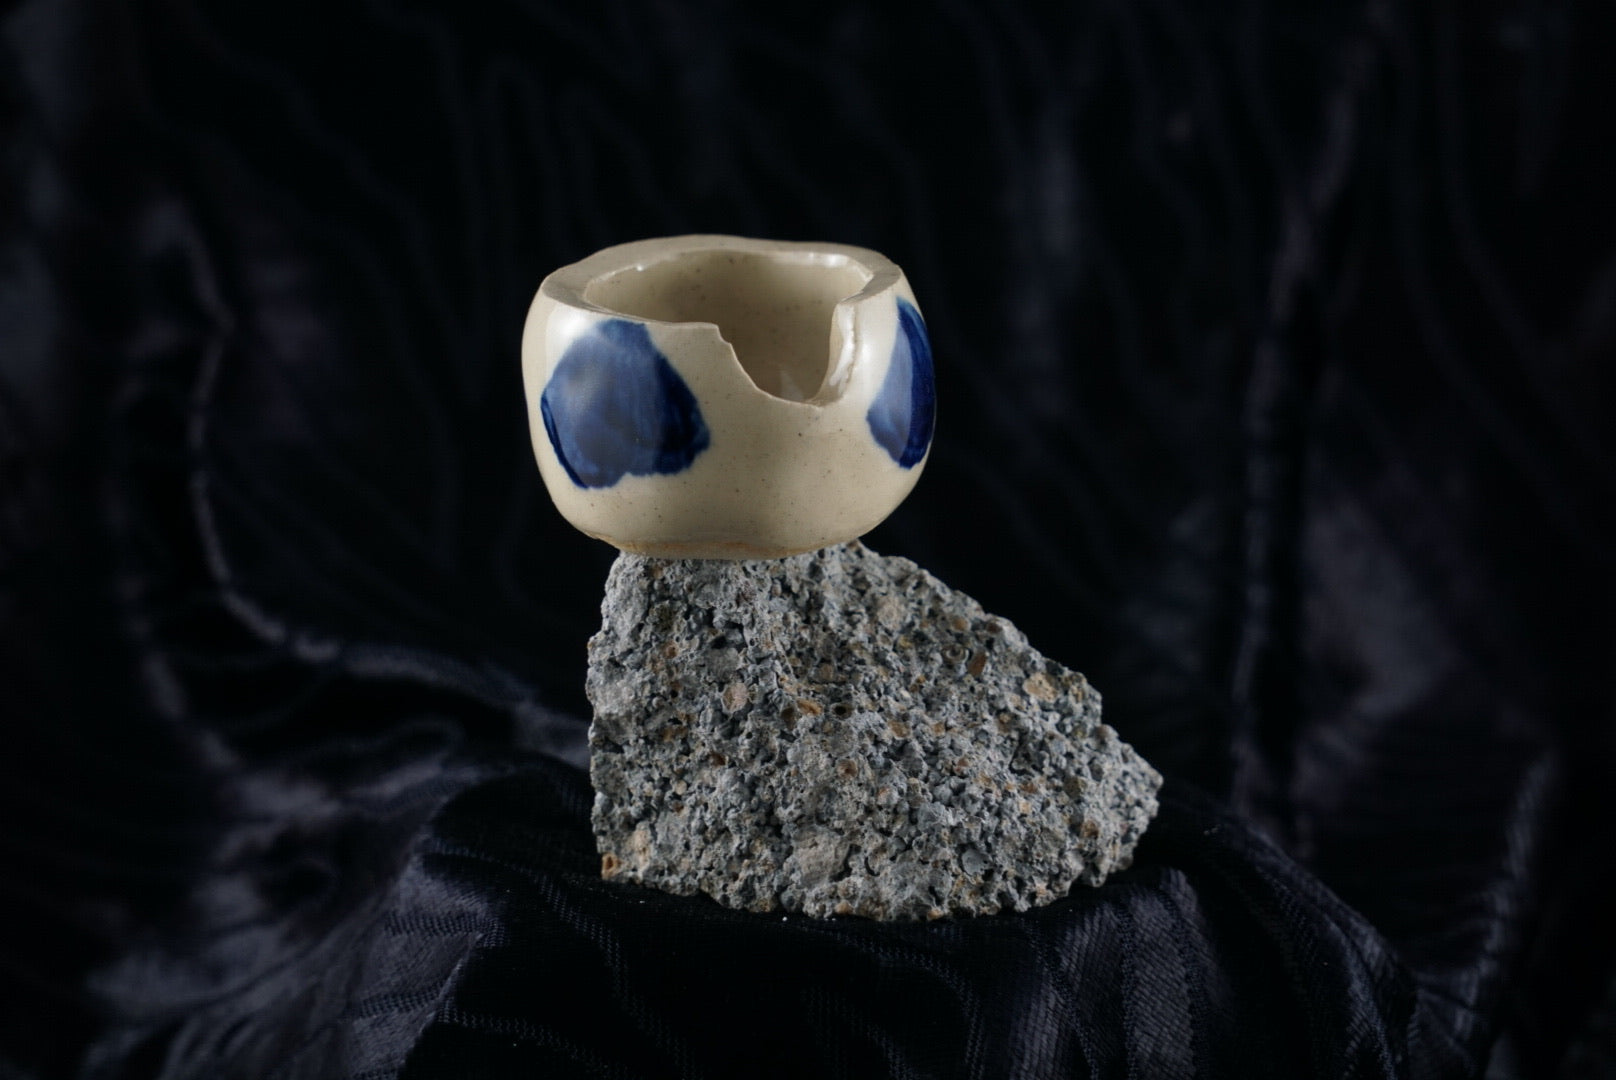 Small, handmade, white and blue ceramic ashtray molded around a piece of black rock